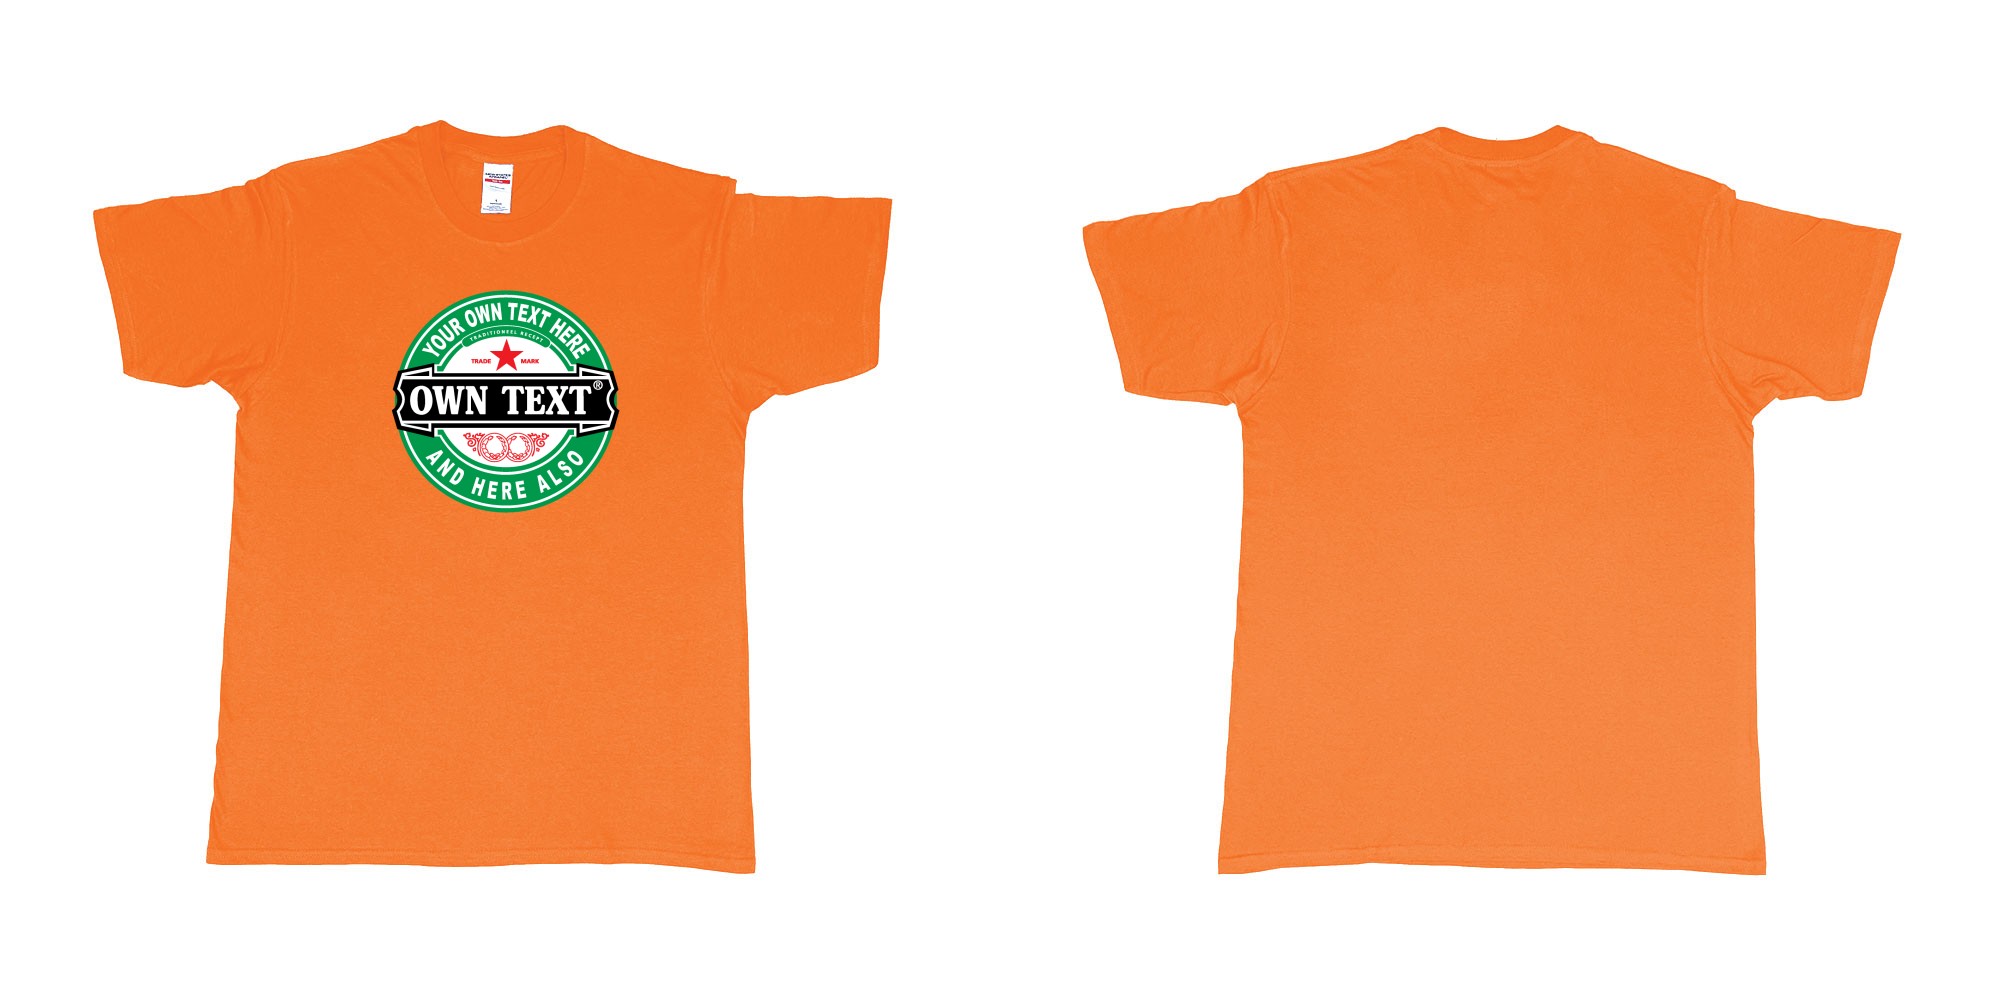 Custom tshirt design Heineken beer in fabric color orange choice your own text made in Bali by The Pirate Way